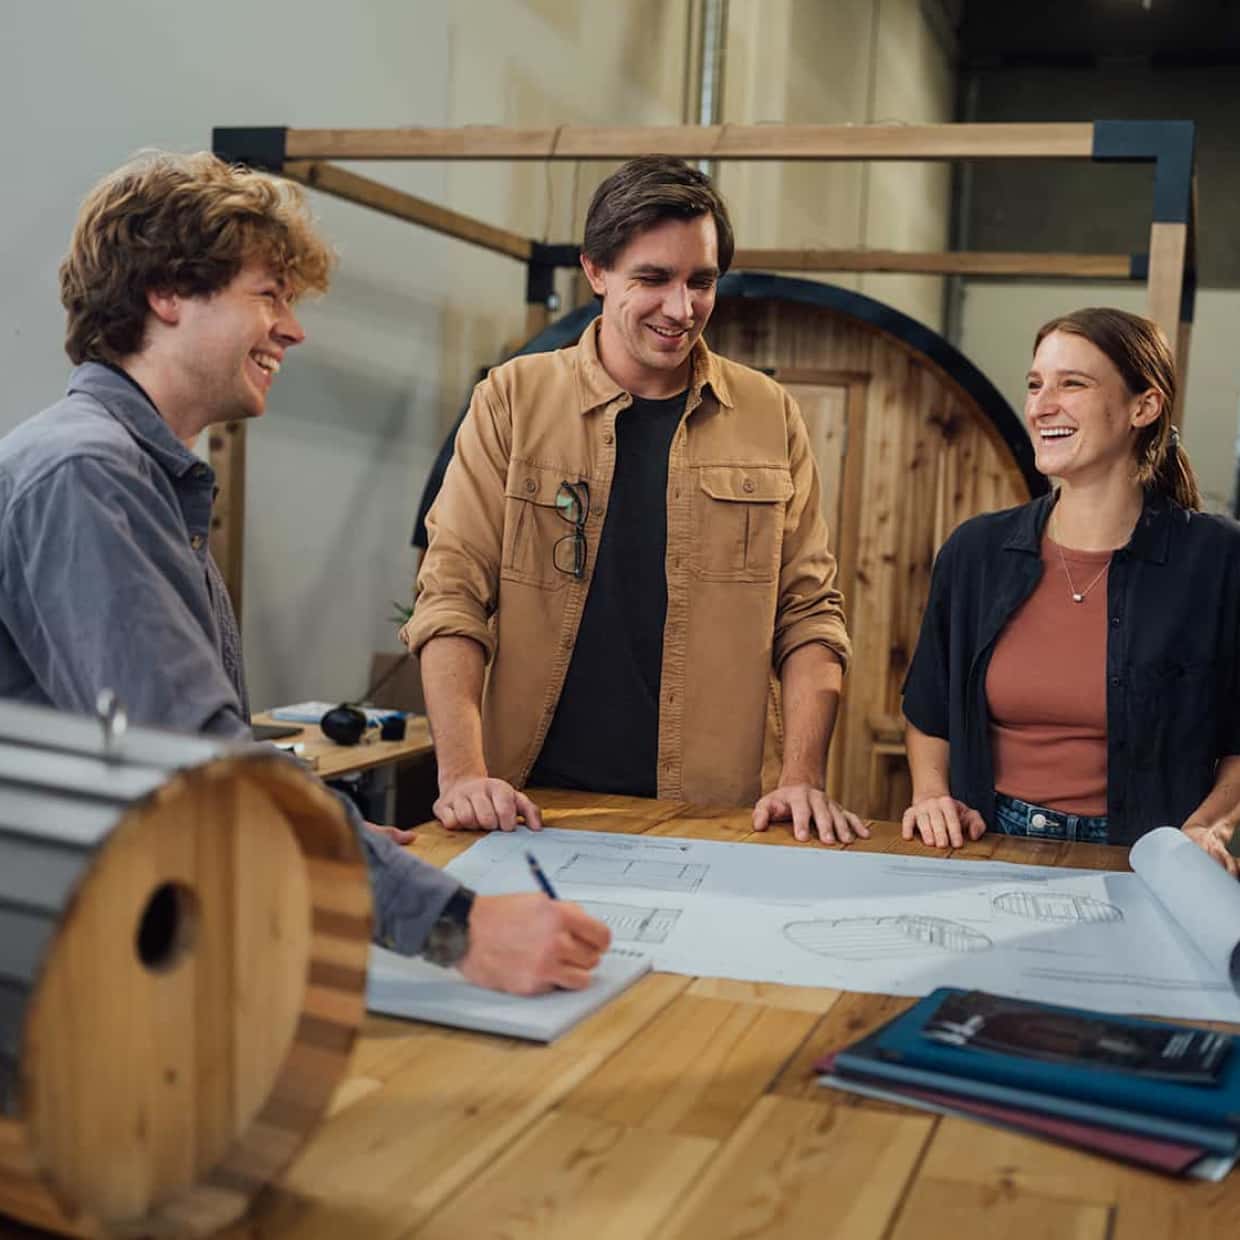 Three people are sitting around a drafting table, smiling and laughing together.